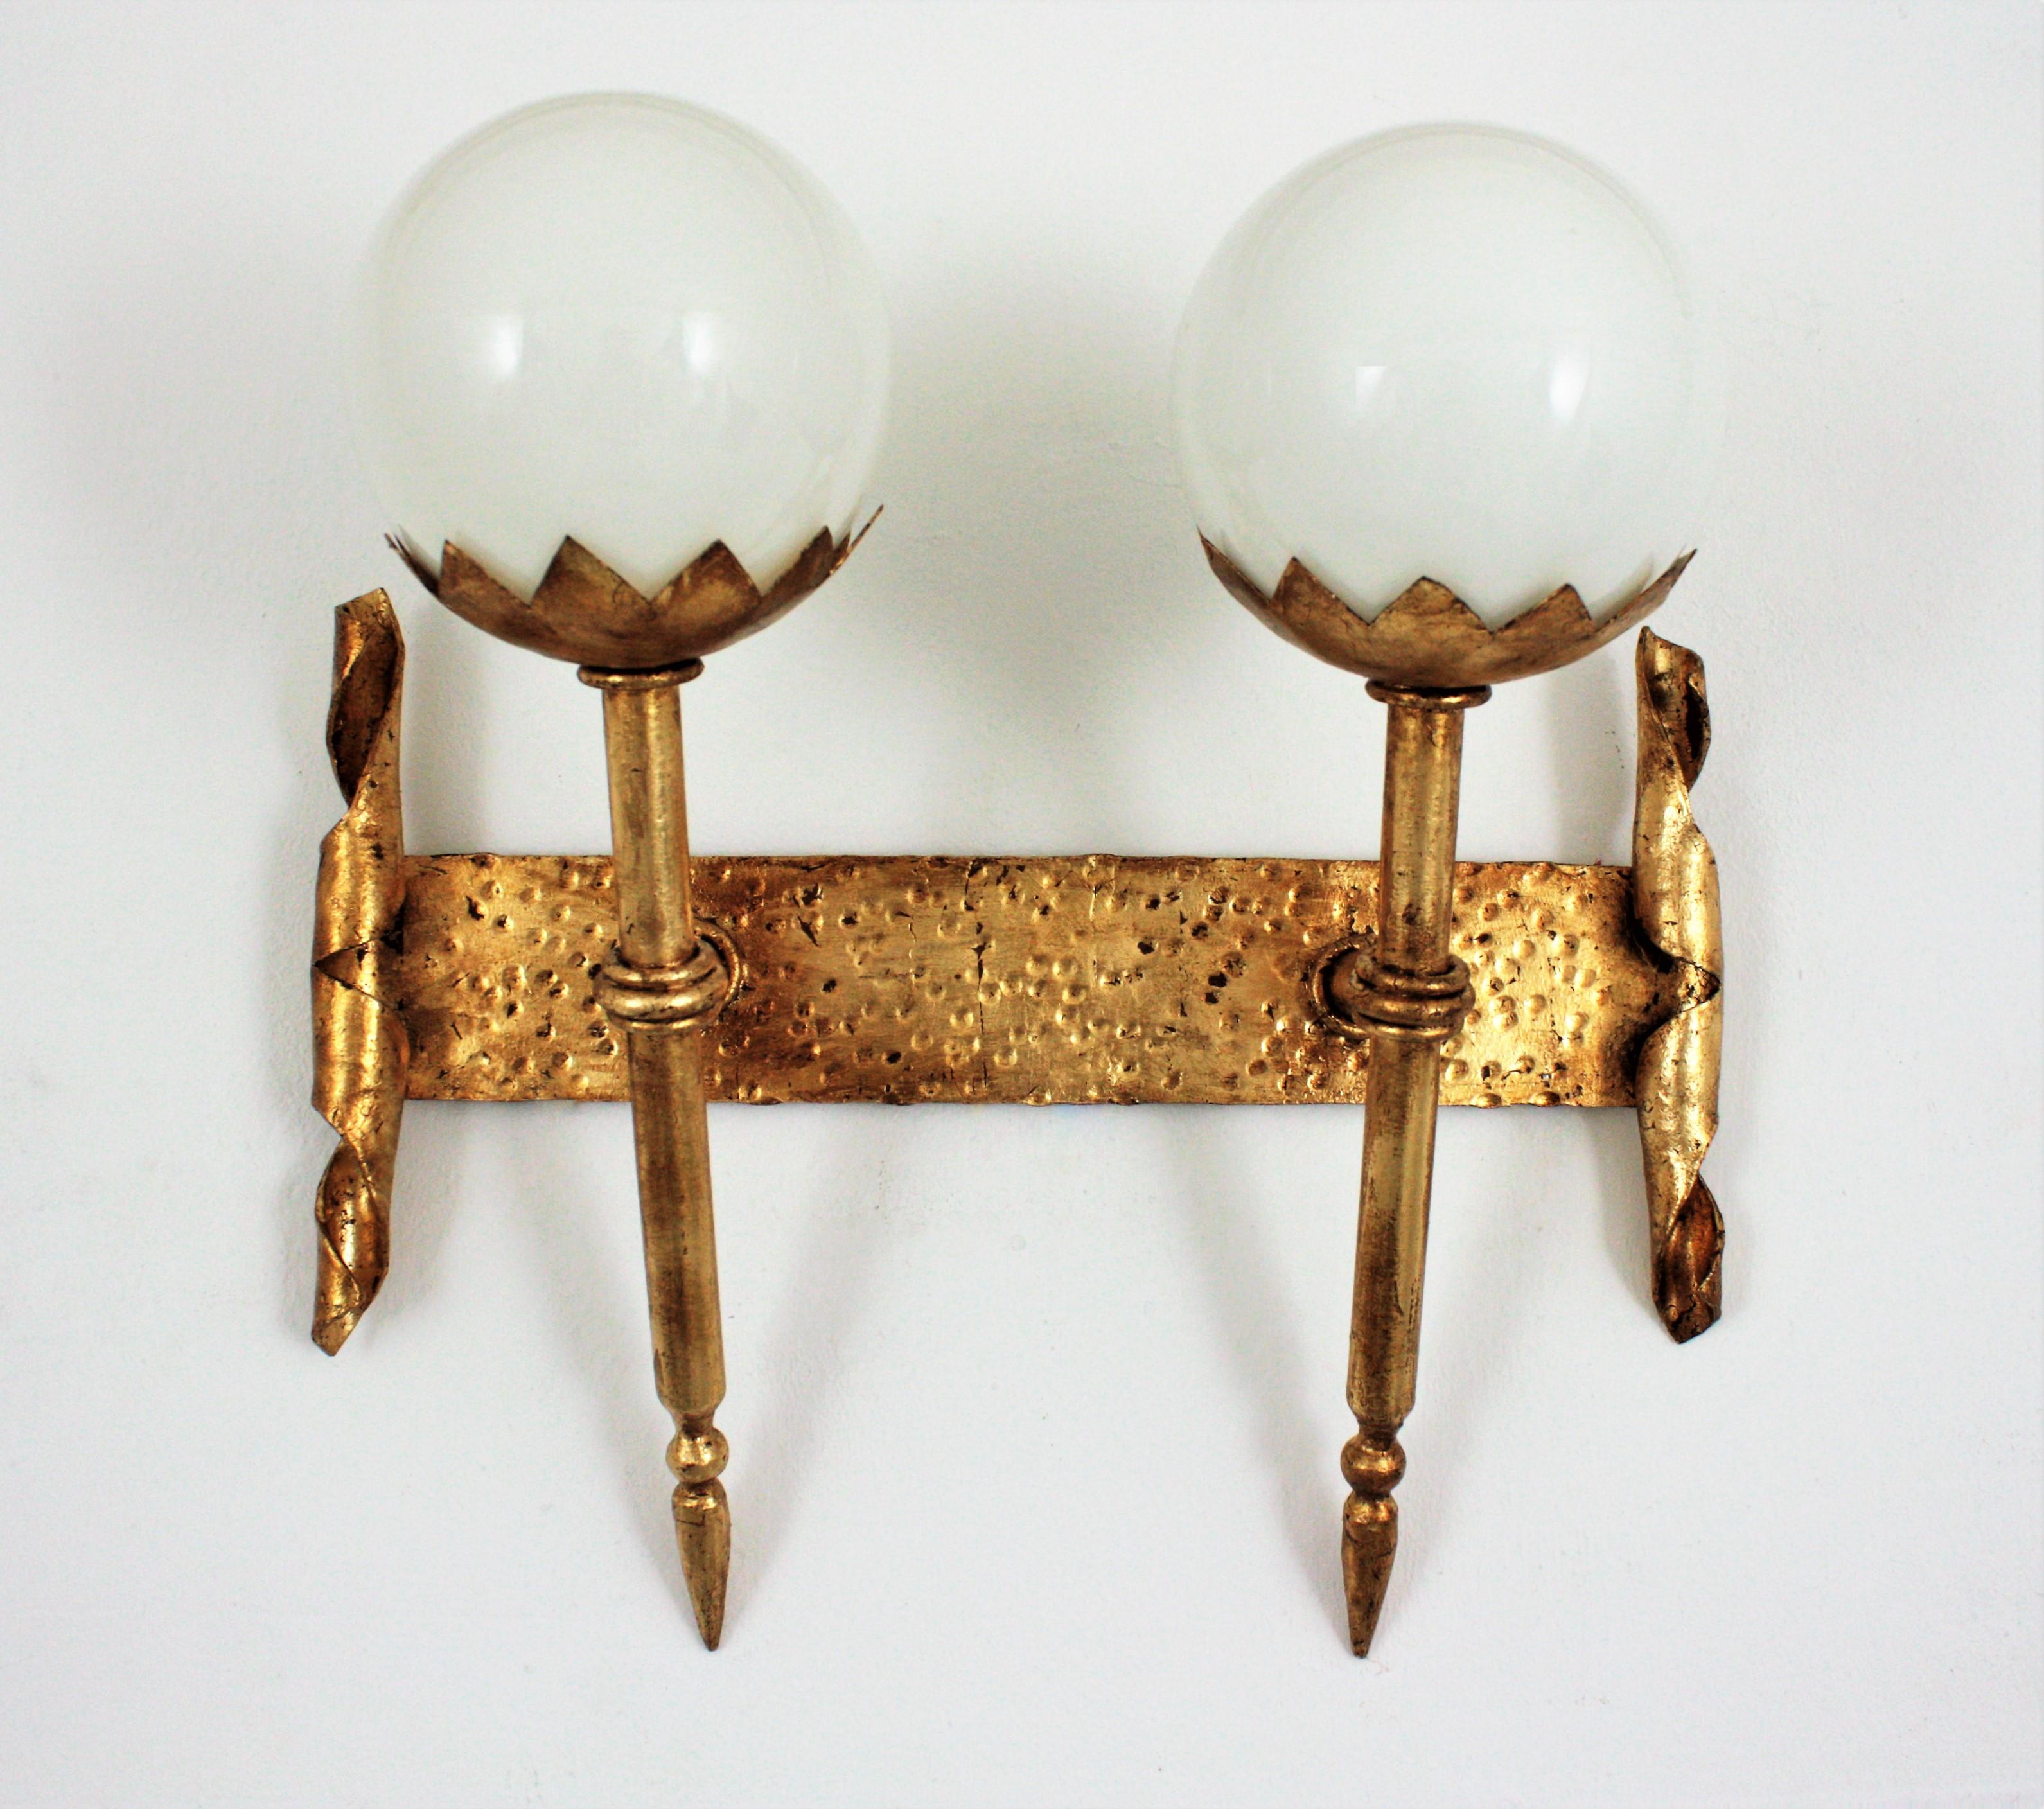 Gothic Revival Double Torch Wall Sconce in Wrought Iron with Milk Glass Globes For Sale 2